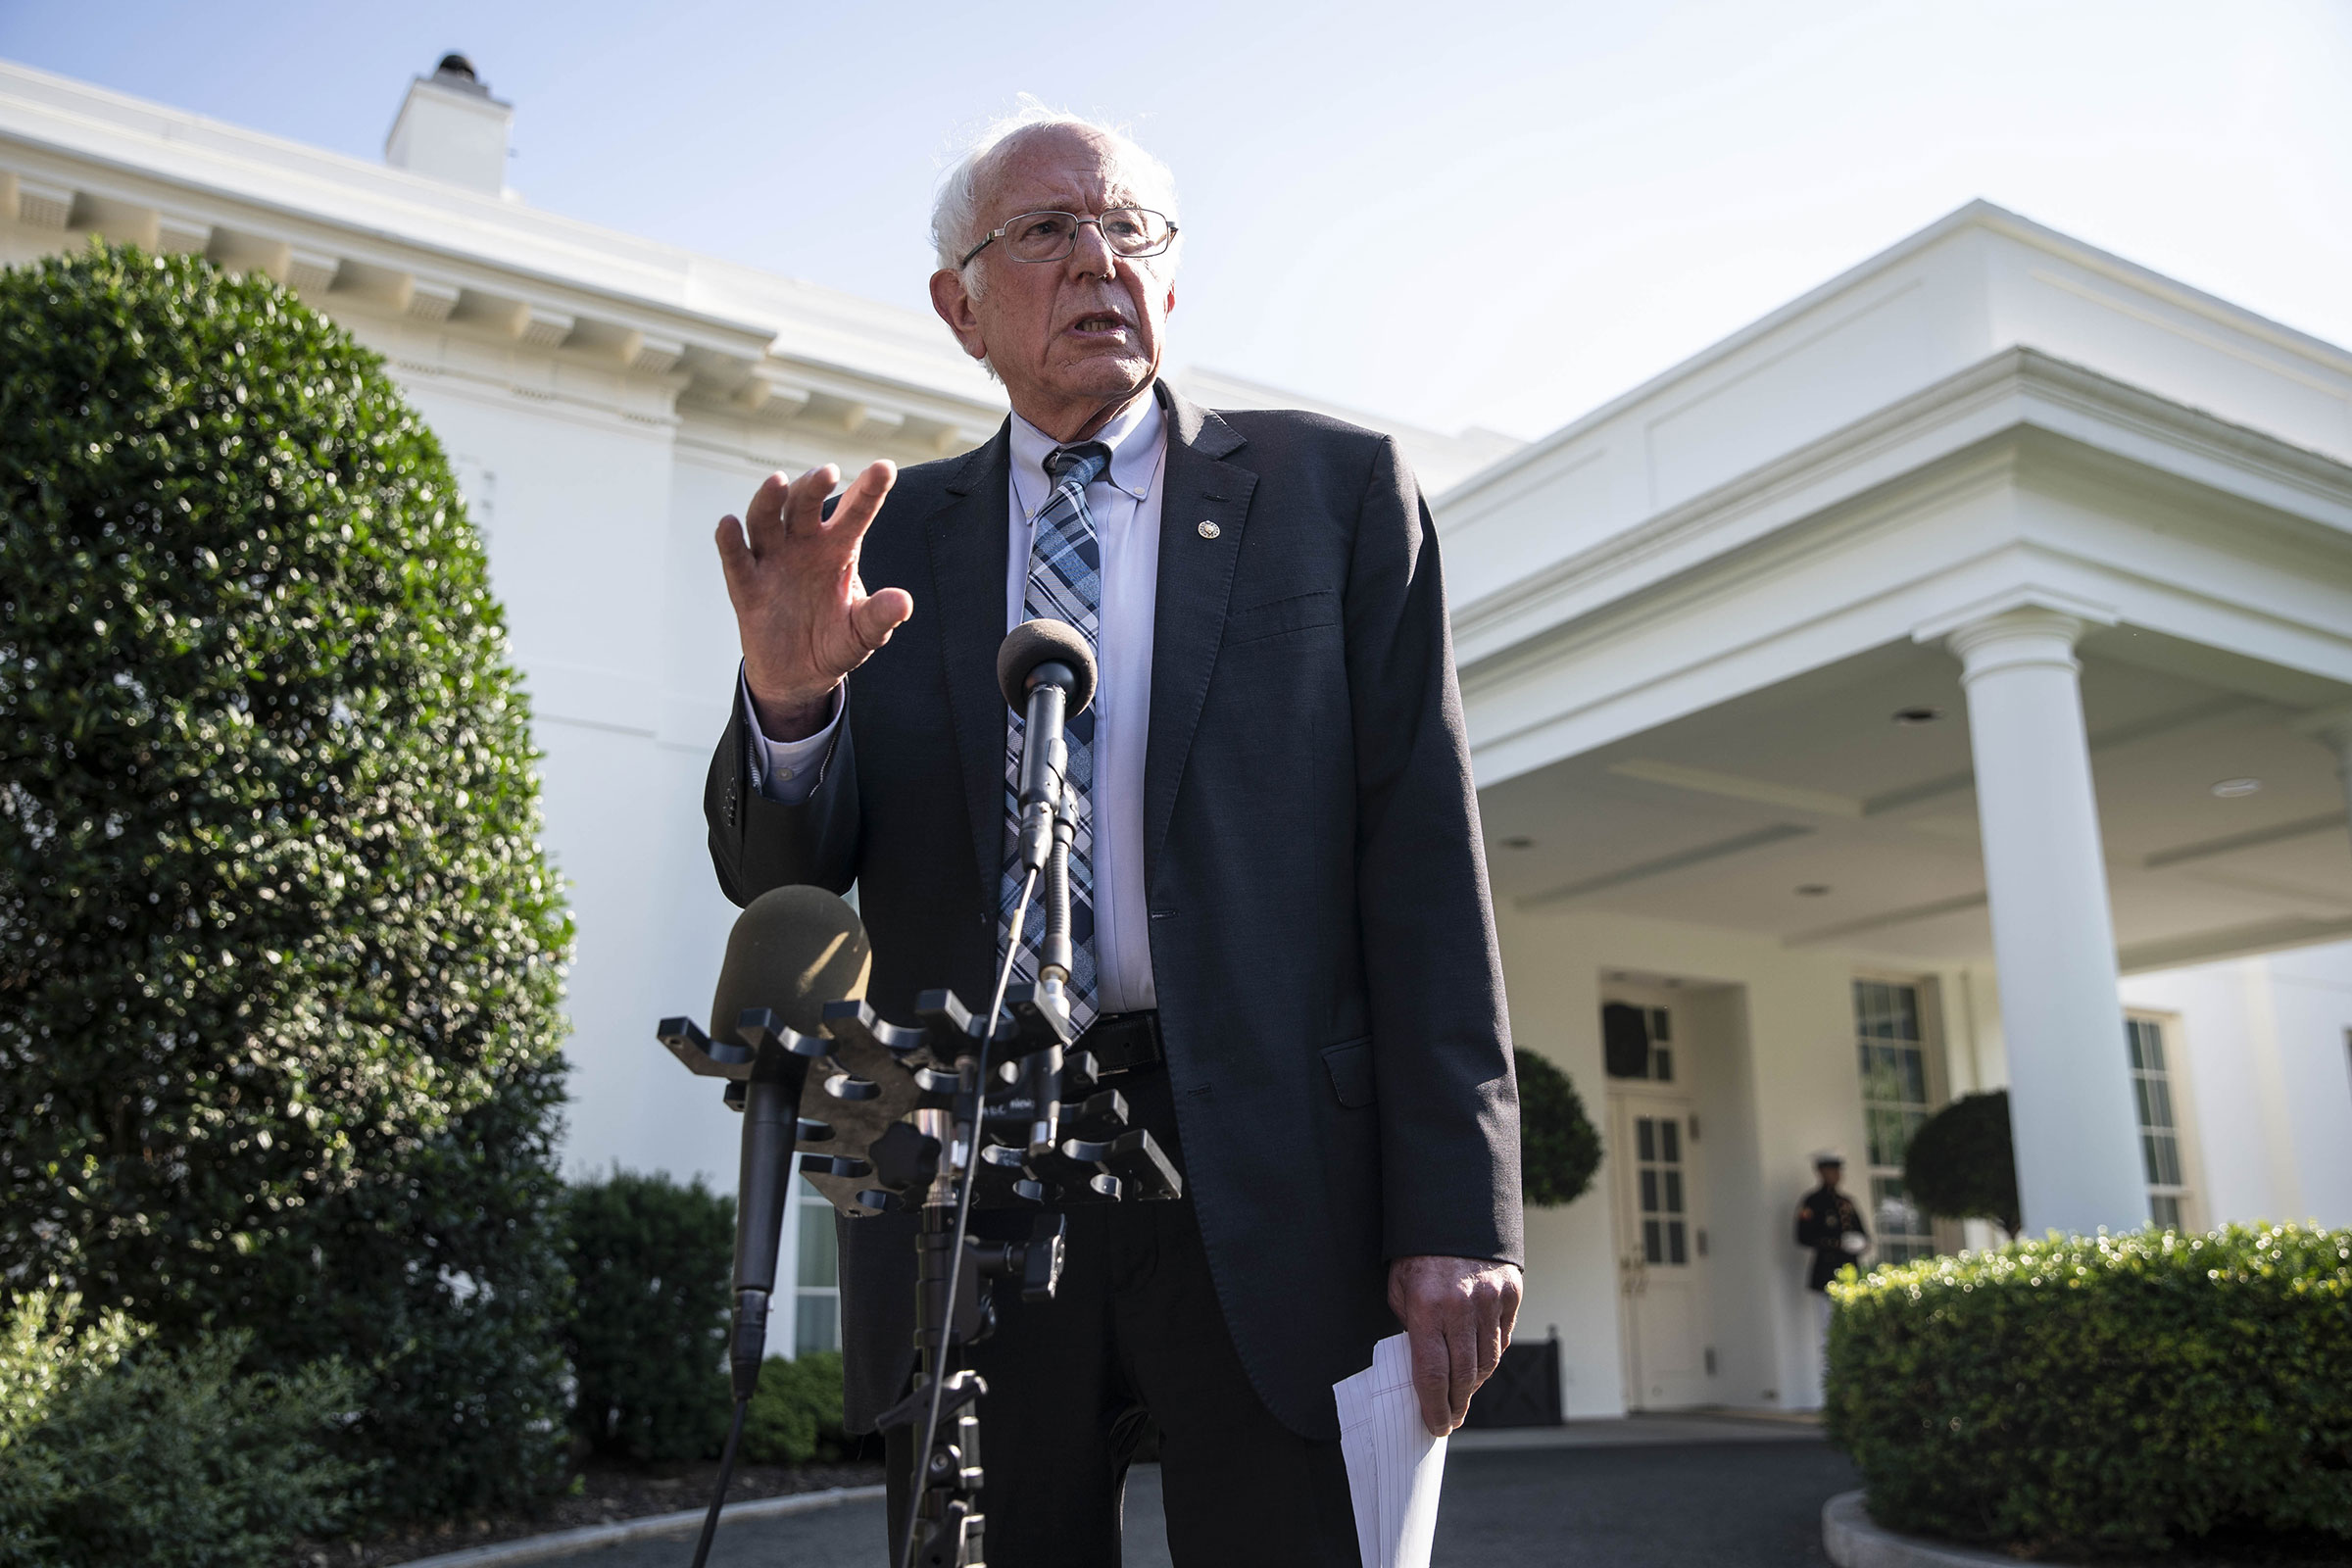 Sanders speaks to members of the media following a meeting with President Biden at the White House on July 12.